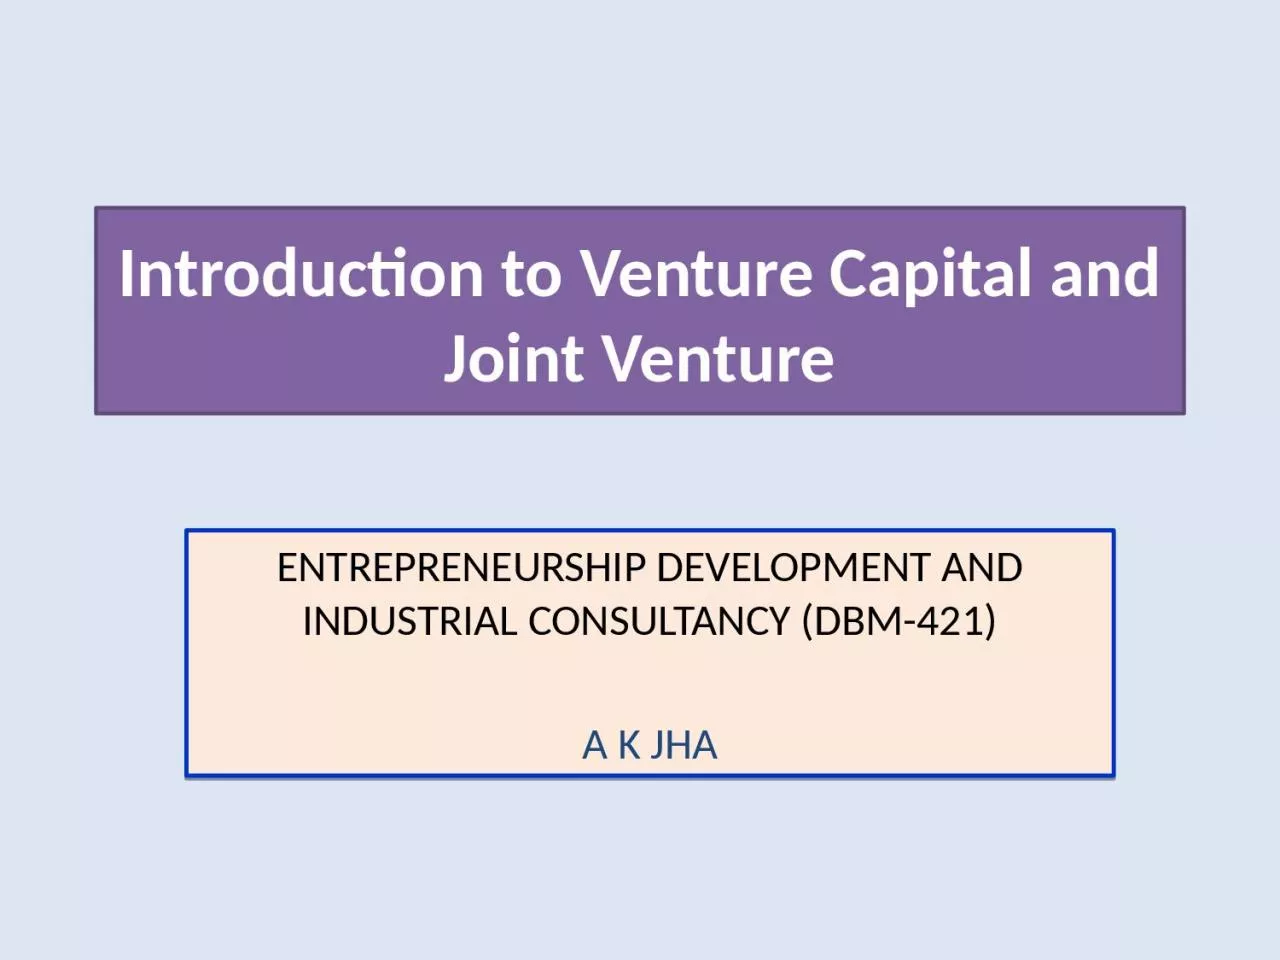 Introduction to Venture Capital and Joint Venture